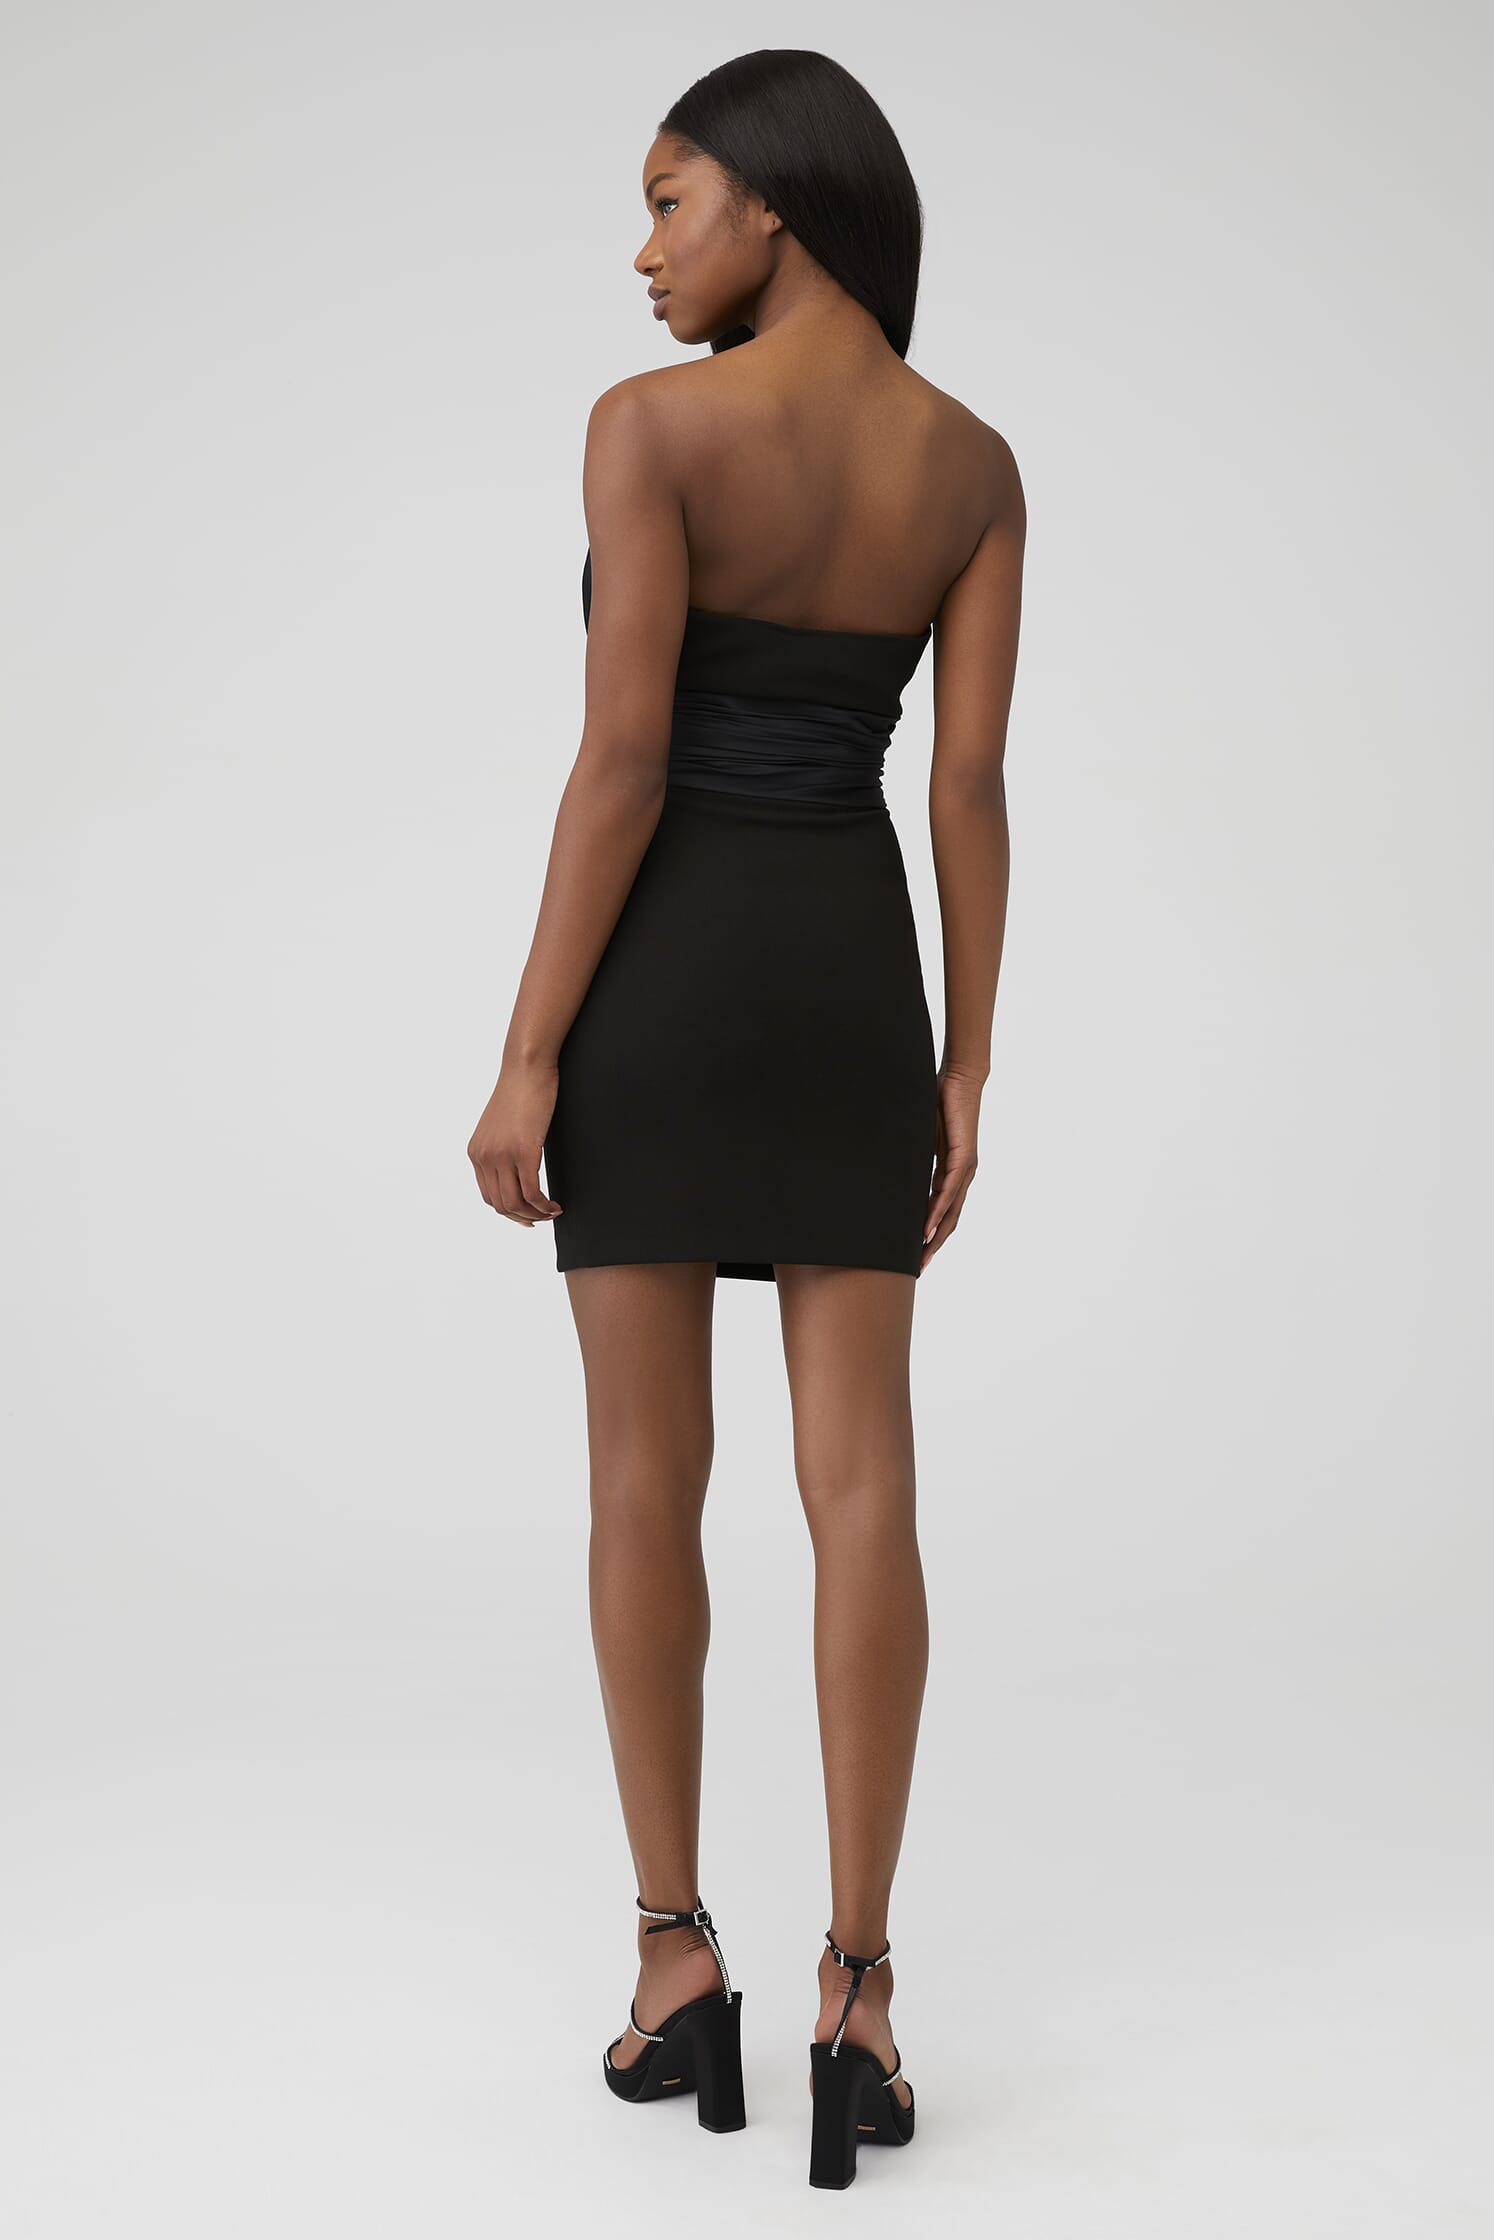 LIKELY Lally Dress in Black